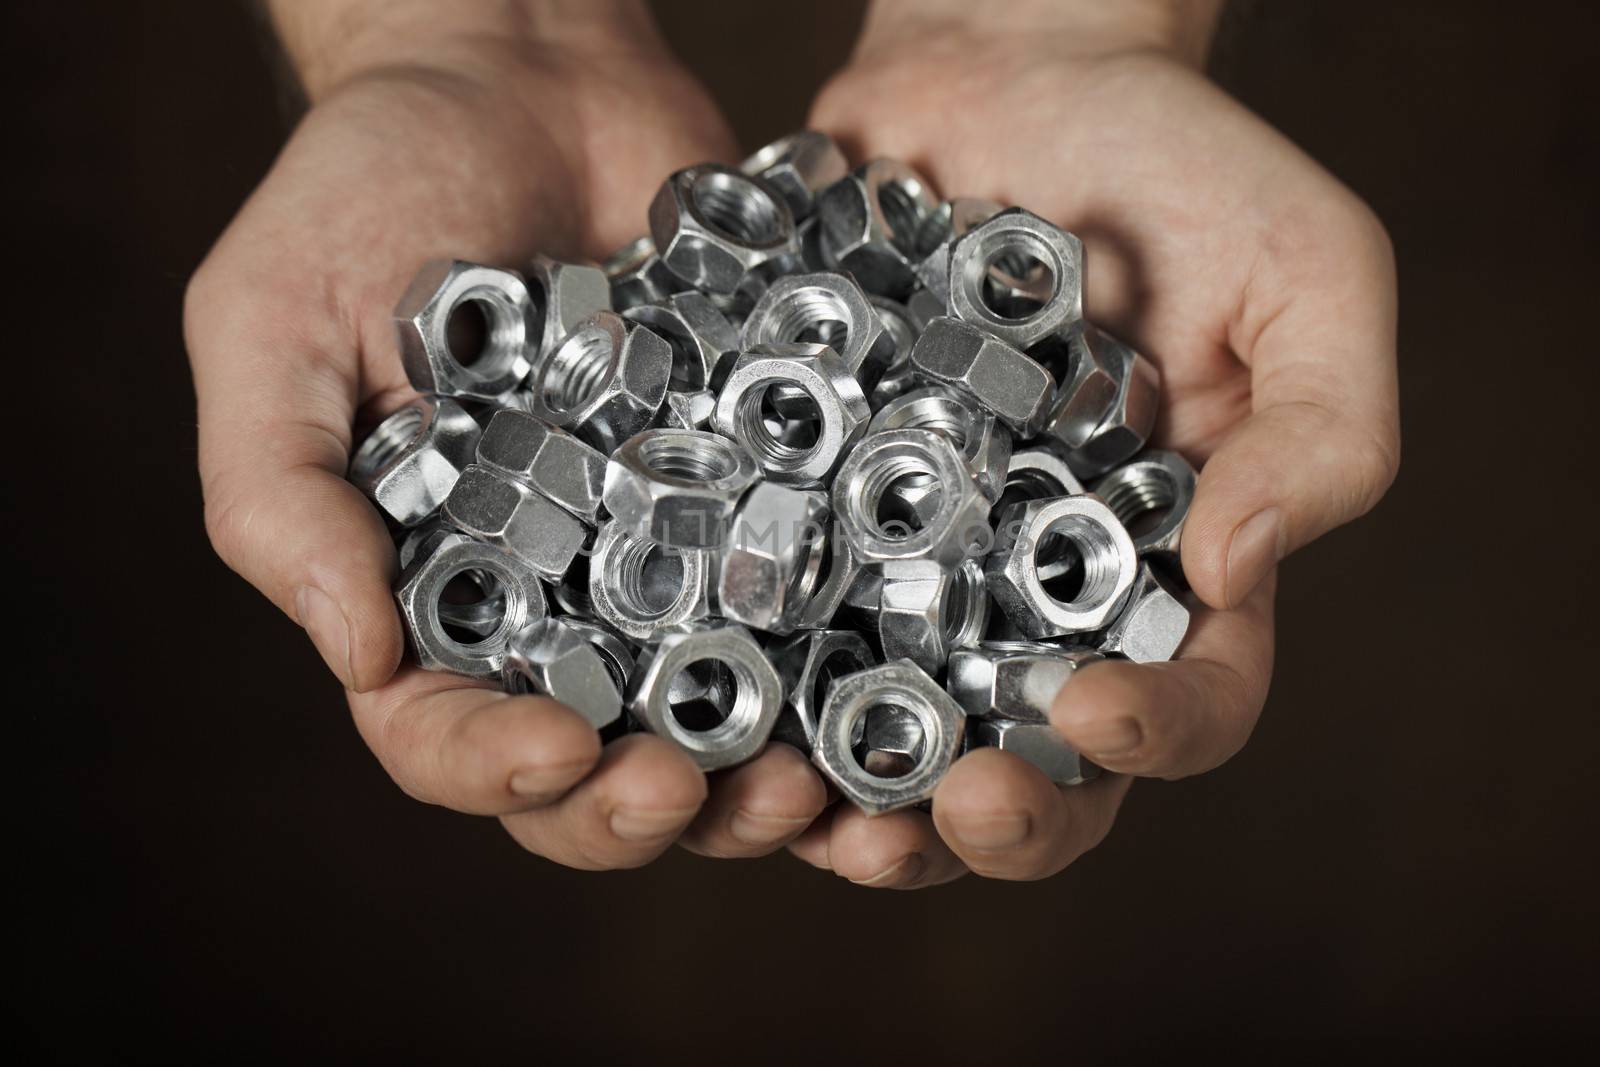 Man holding metallic nuts in his hands.